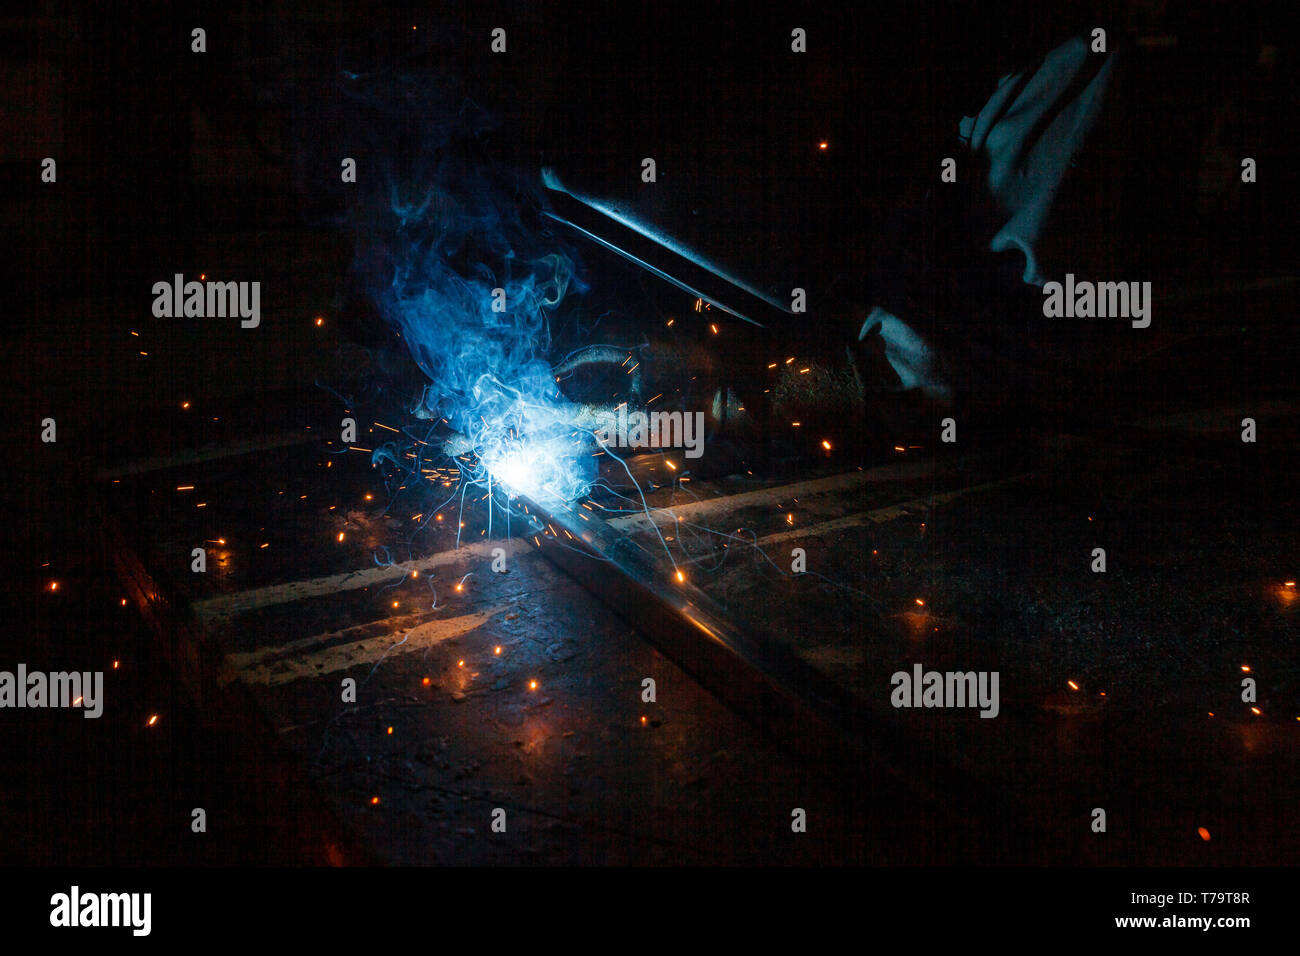 View of welding on construction site at night with shower of sparks and blue ark of electricity Stock Photo